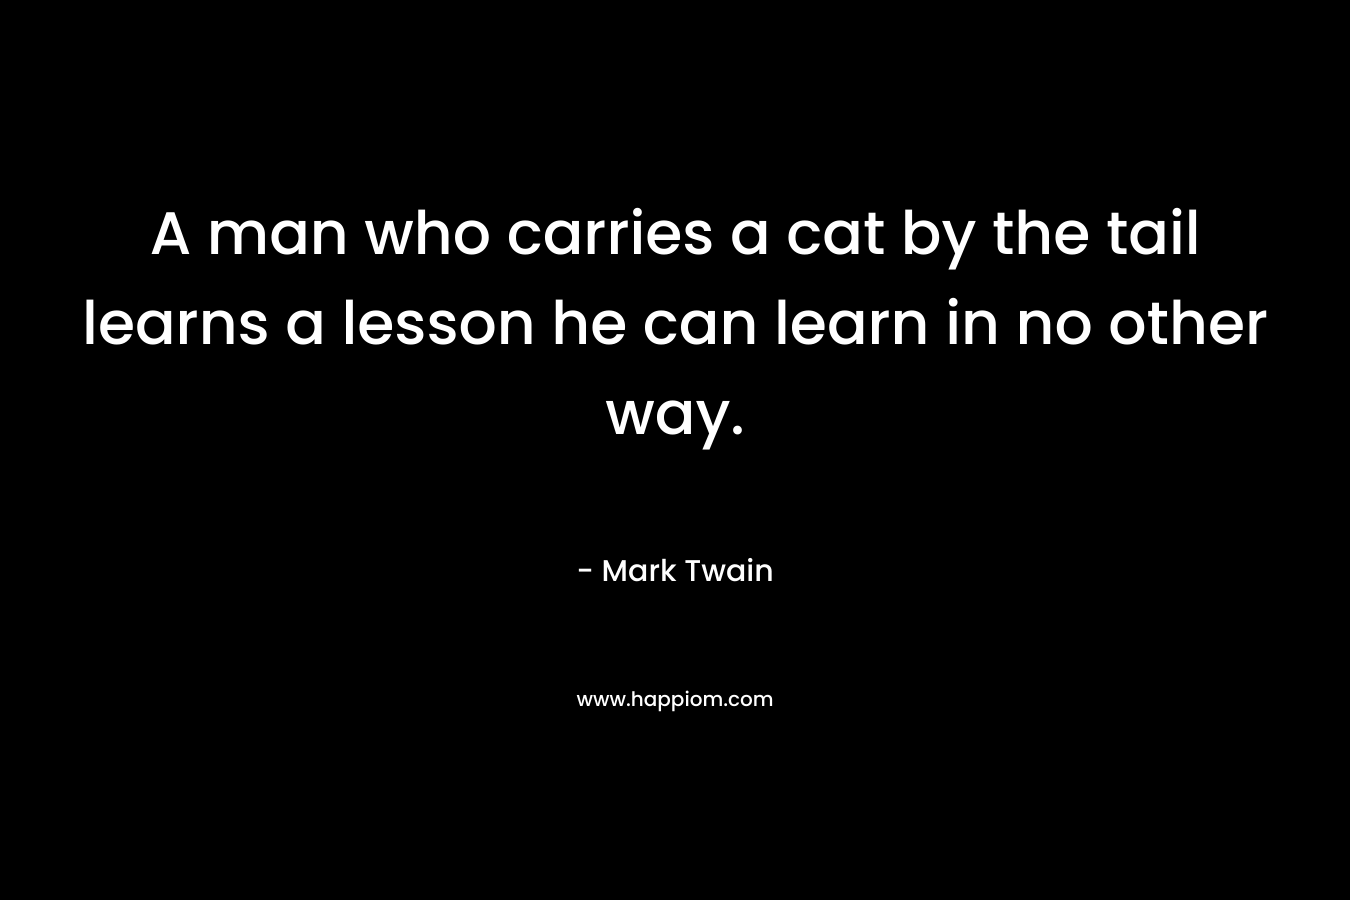 A man who carries a cat by the tail learns a lesson he can learn in no other way. – Mark Twain